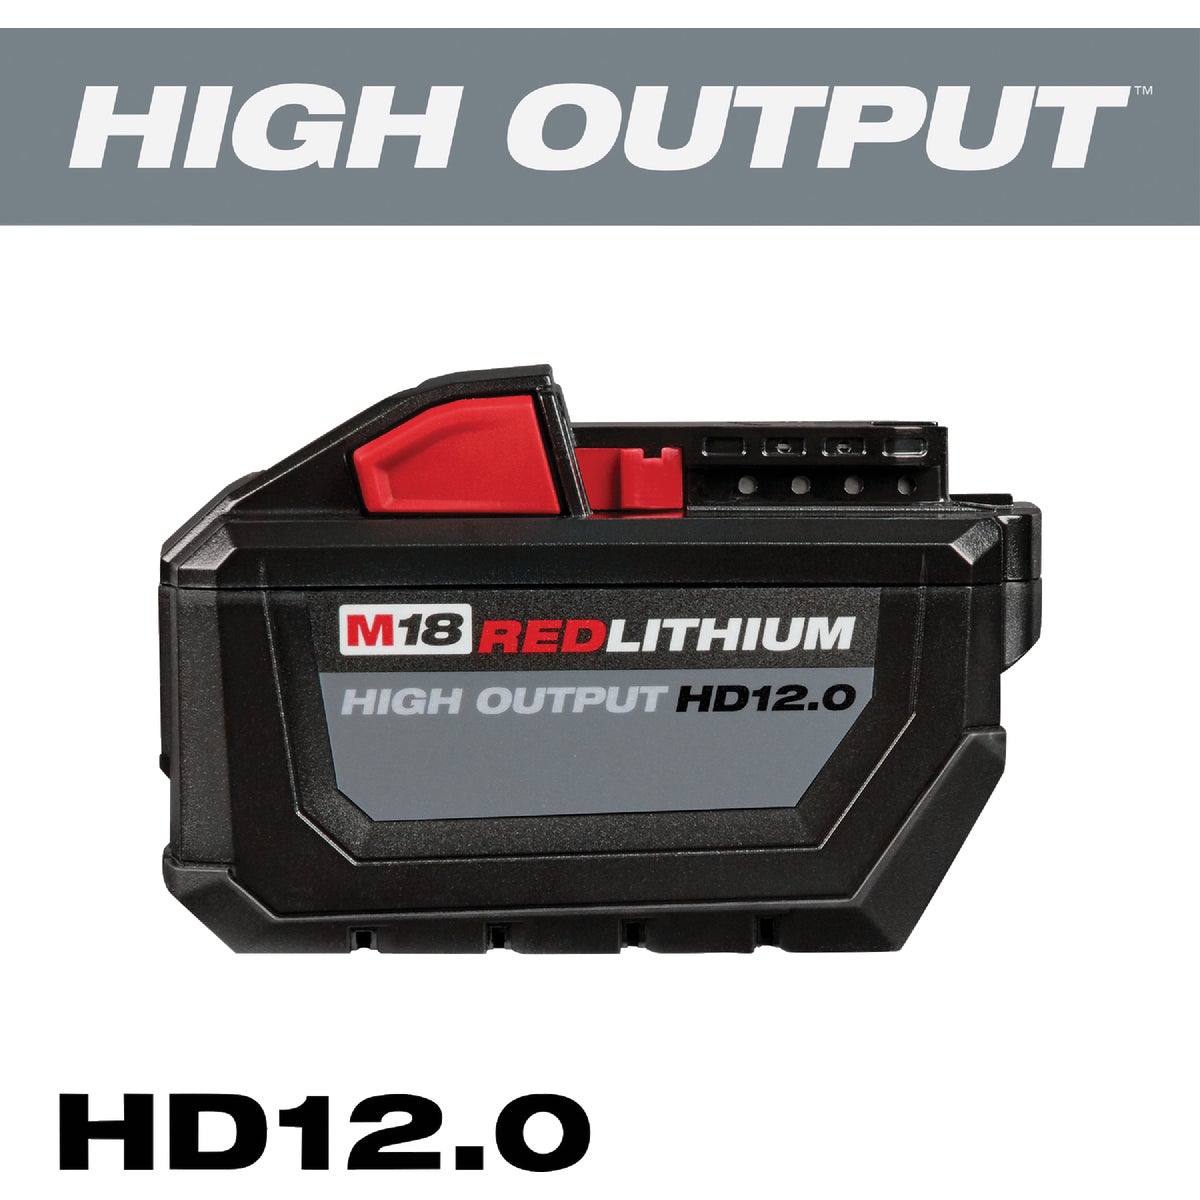 Item 304037, The M18 REDLITHIUM High Output battery pack provides 50% more power and 